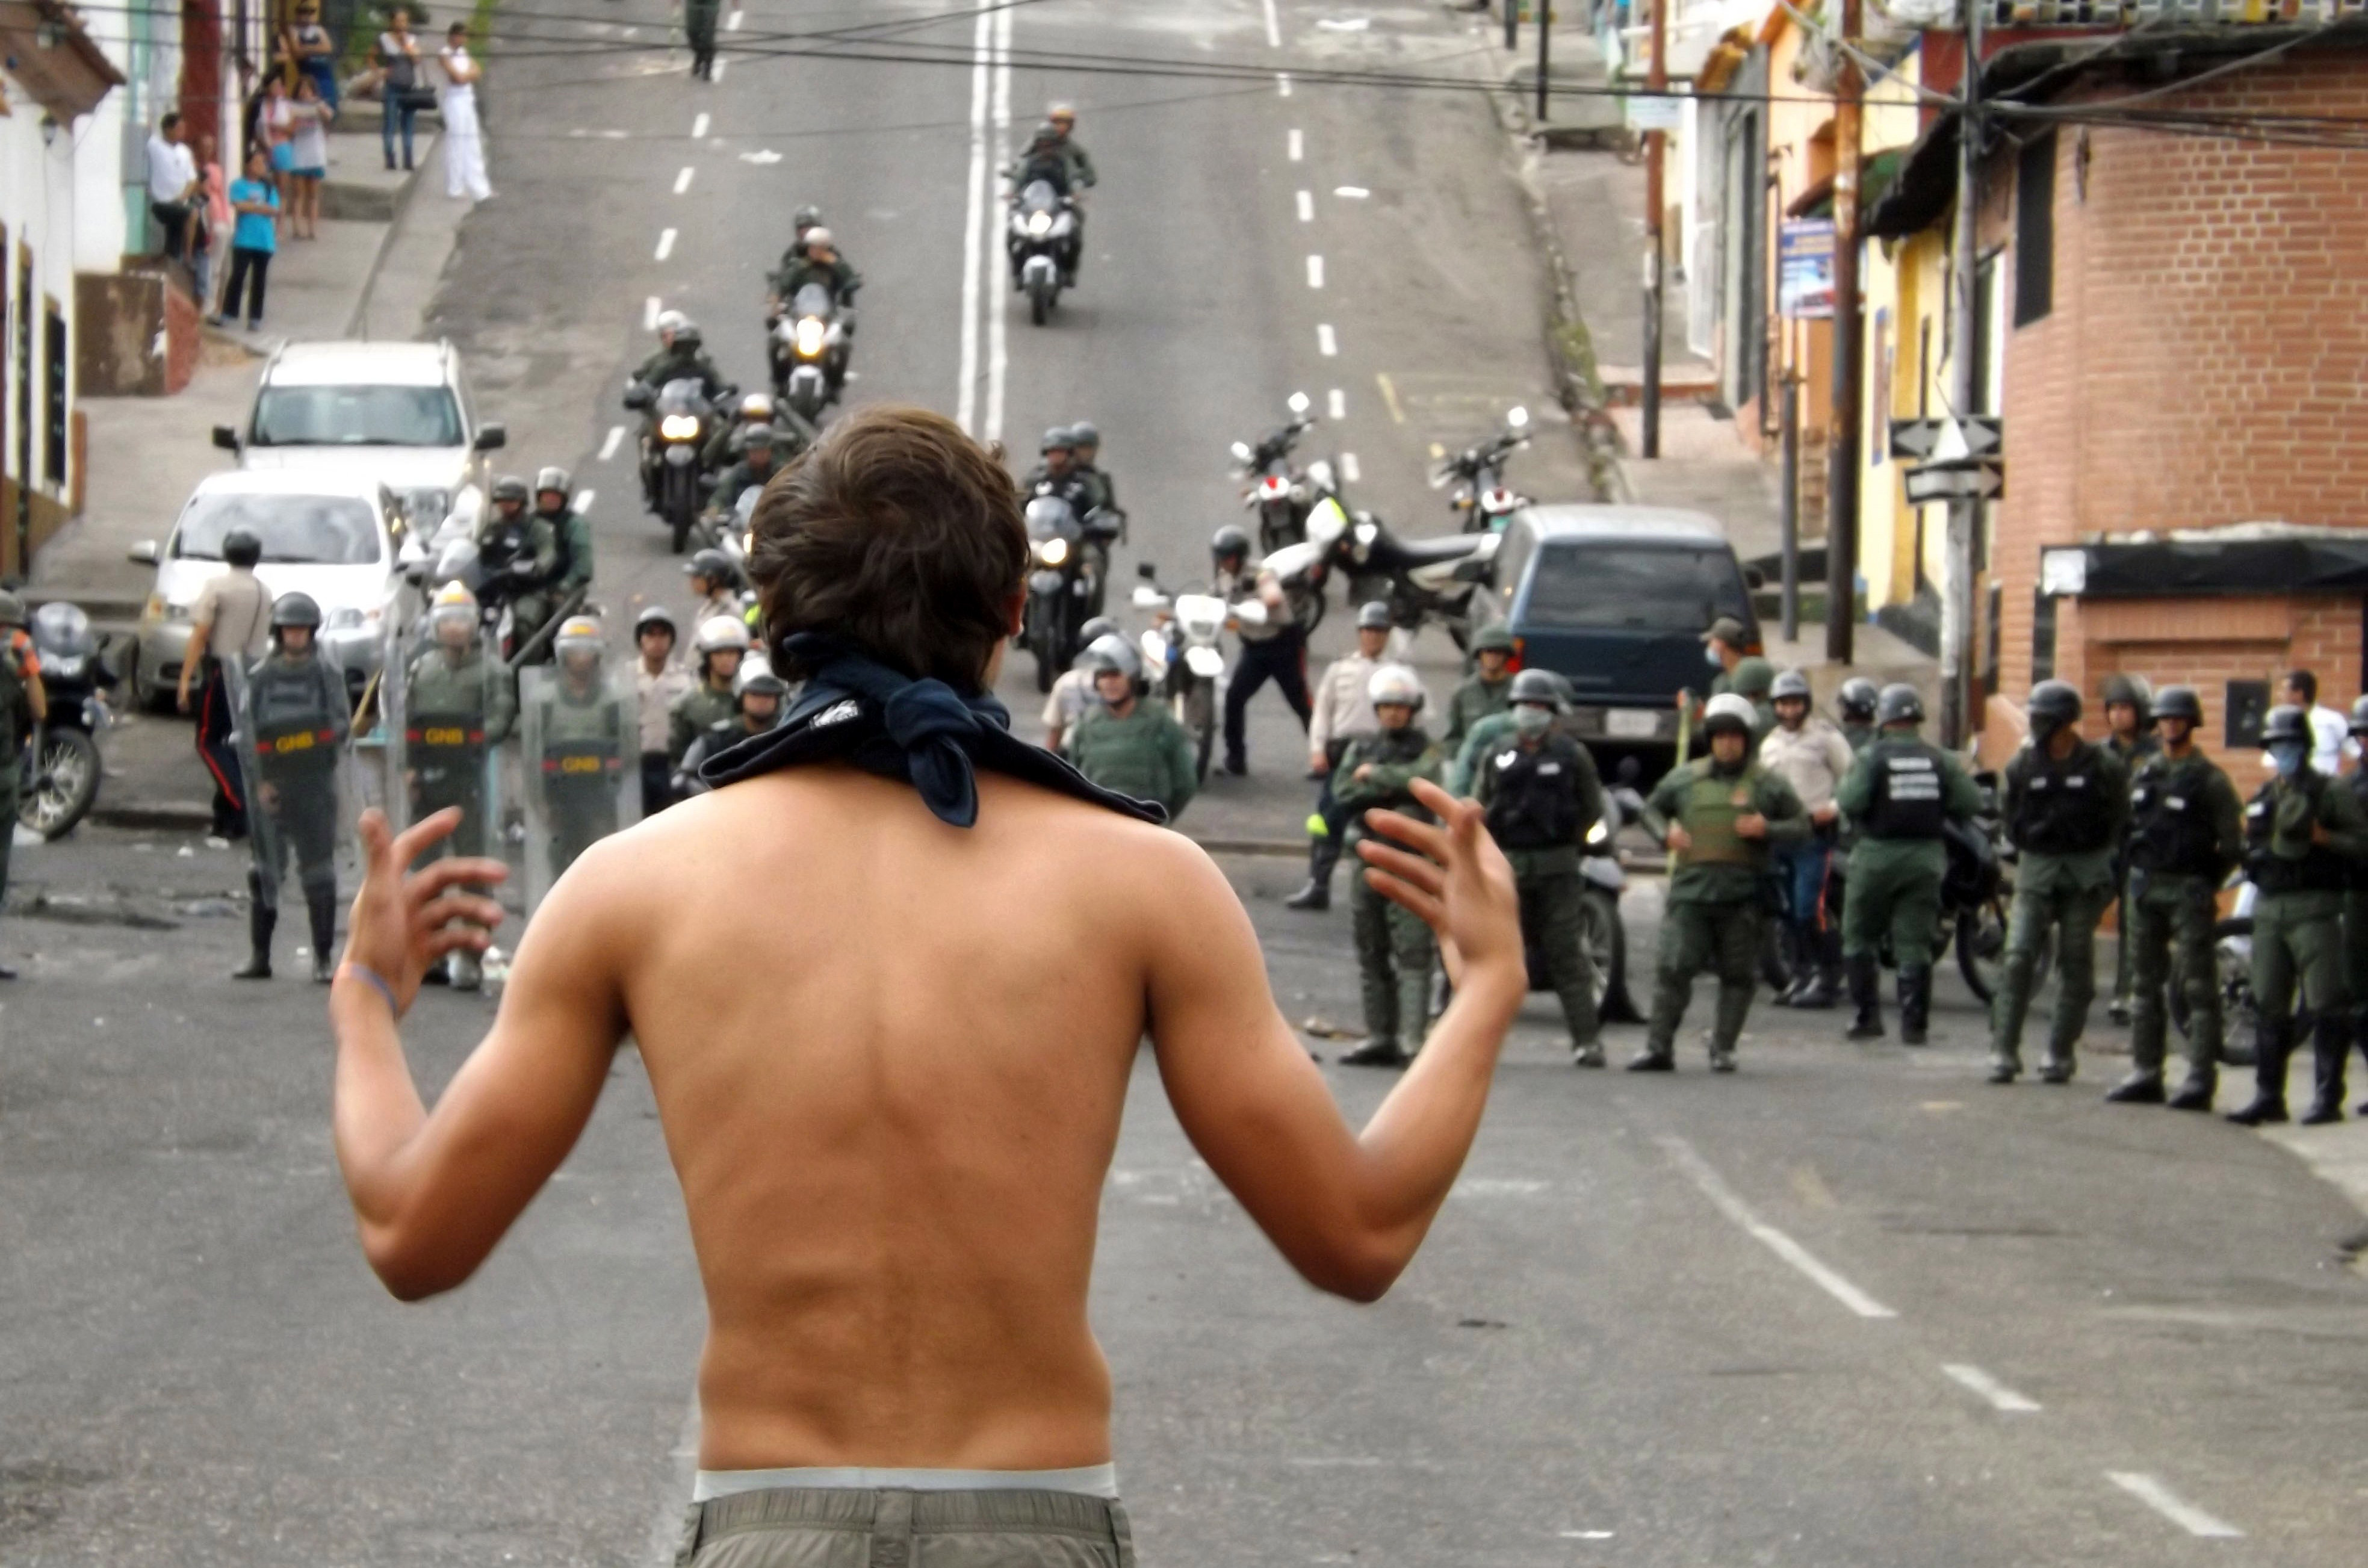 An activists faces National Guard troopers during a protest in San Cristobal, capital of the western border state of Tachira, Venezuela, on February 27, 2014. Dueling demos of pro- and anti-g